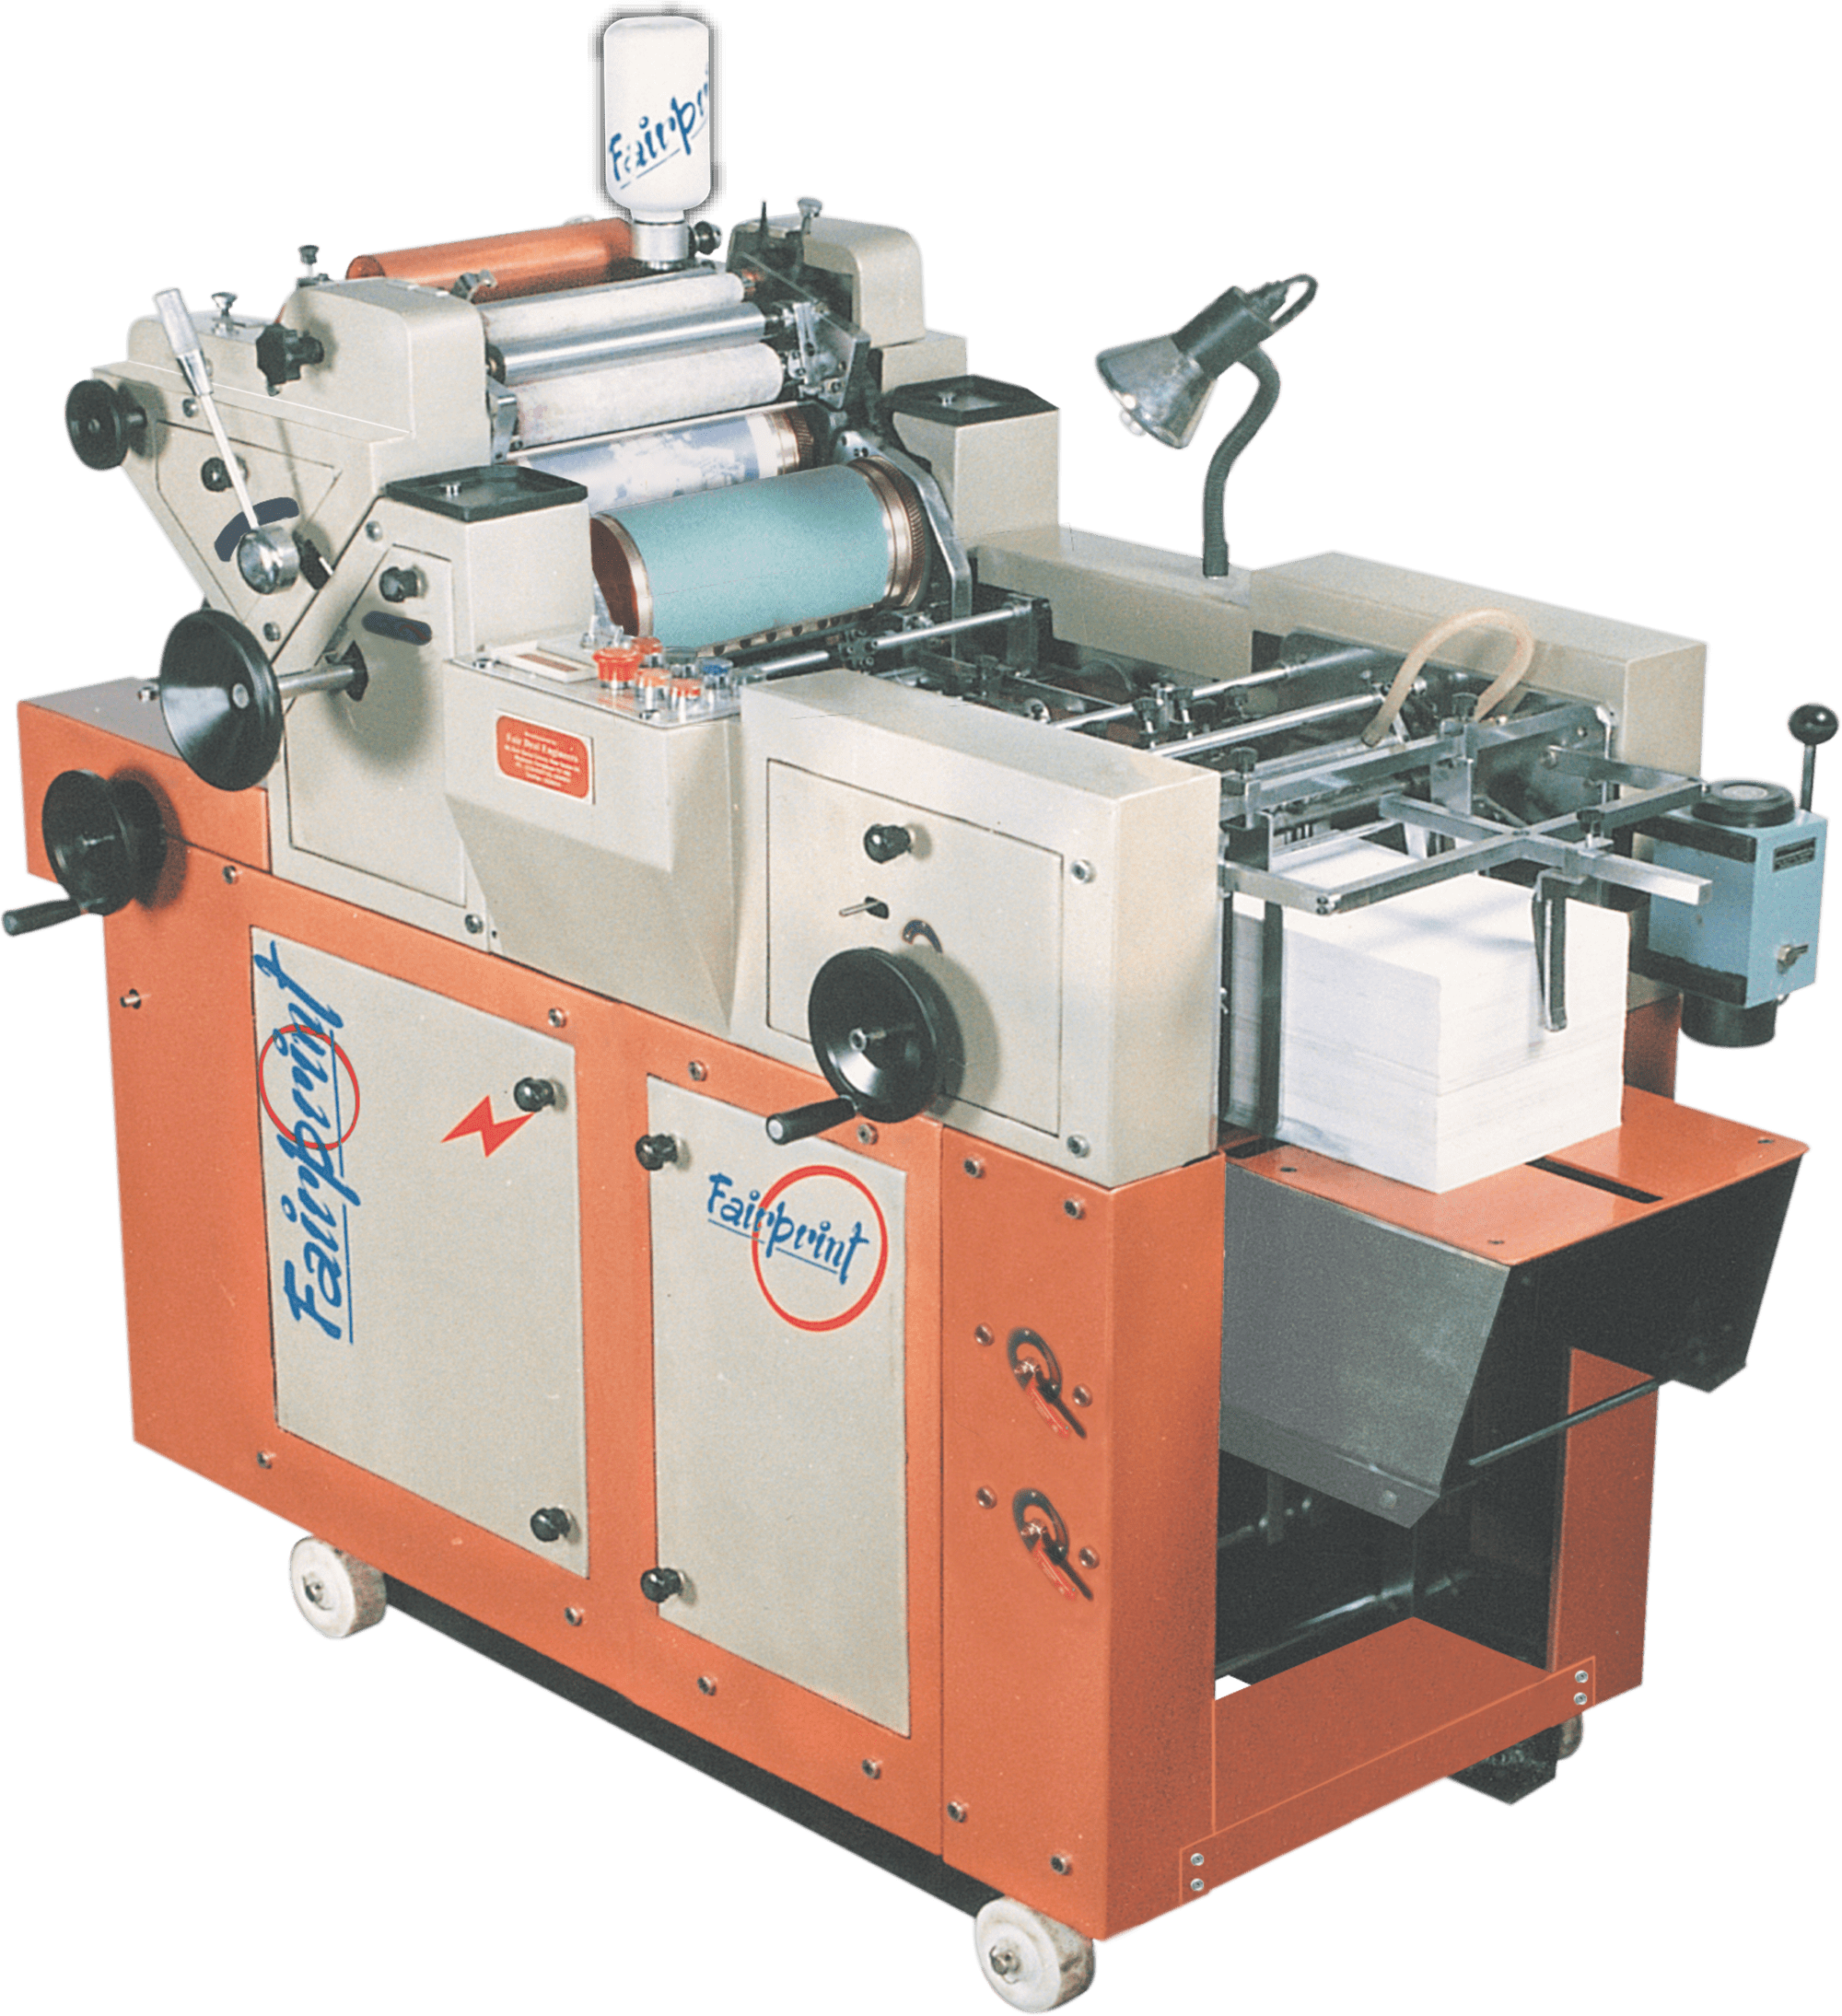 All You Need to Know About Offset Printing Machine